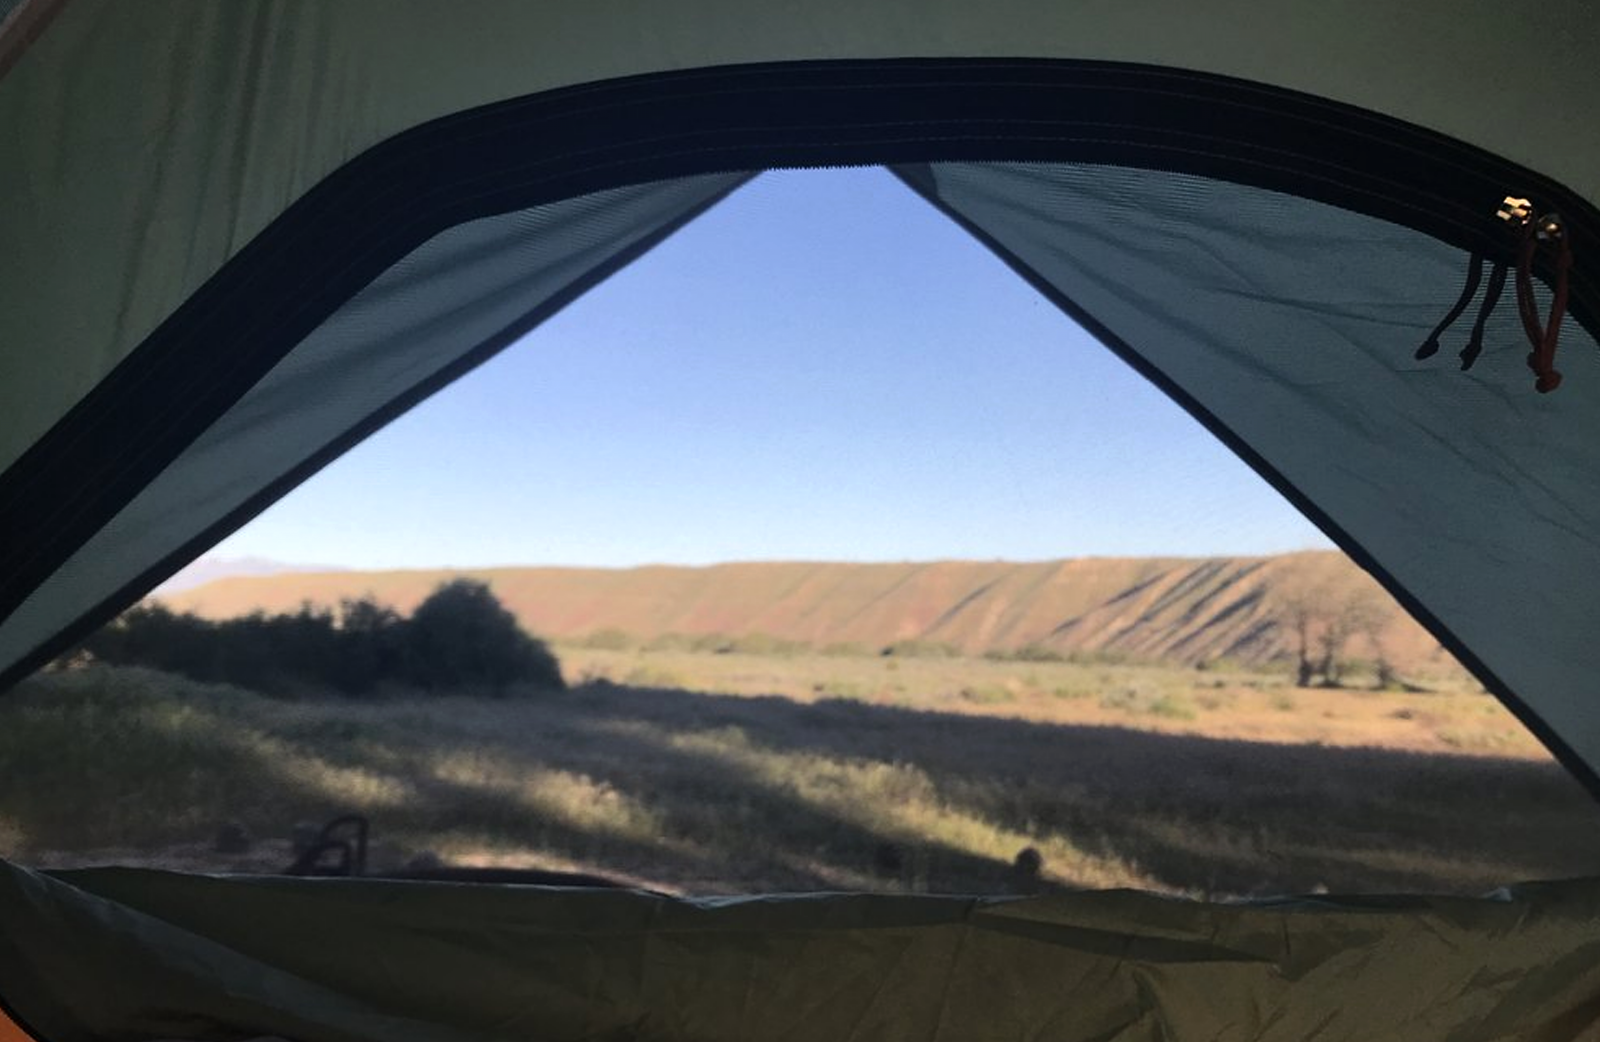 A view from inside looking out in a open tent at Mojave River Forks.